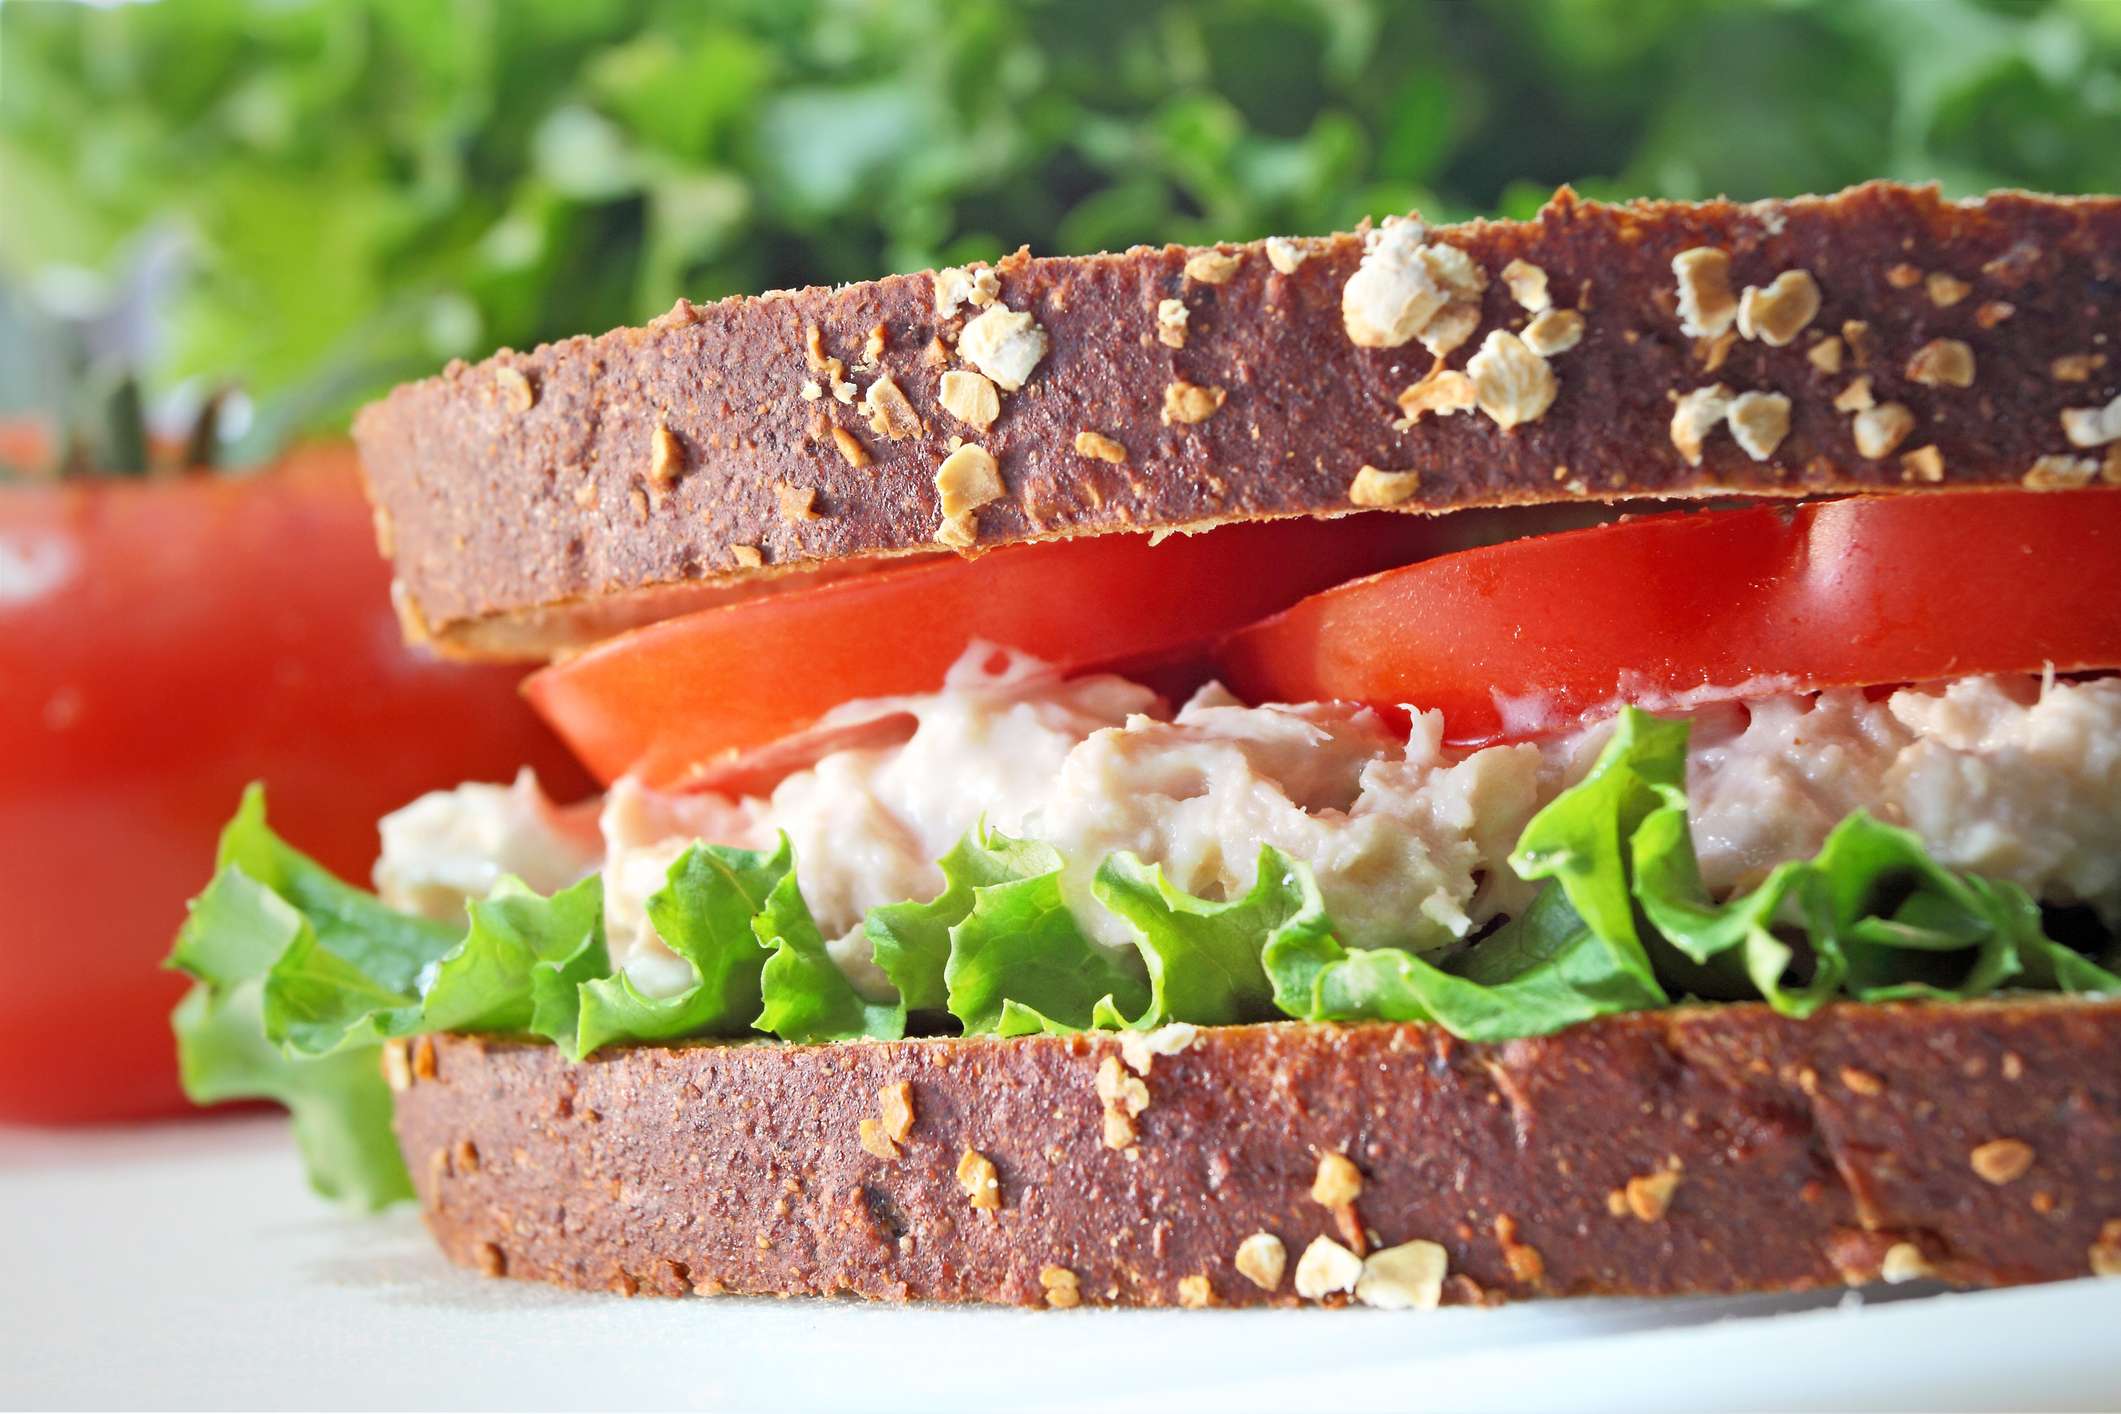 Canned Tuna May Cause High Blood Pressure